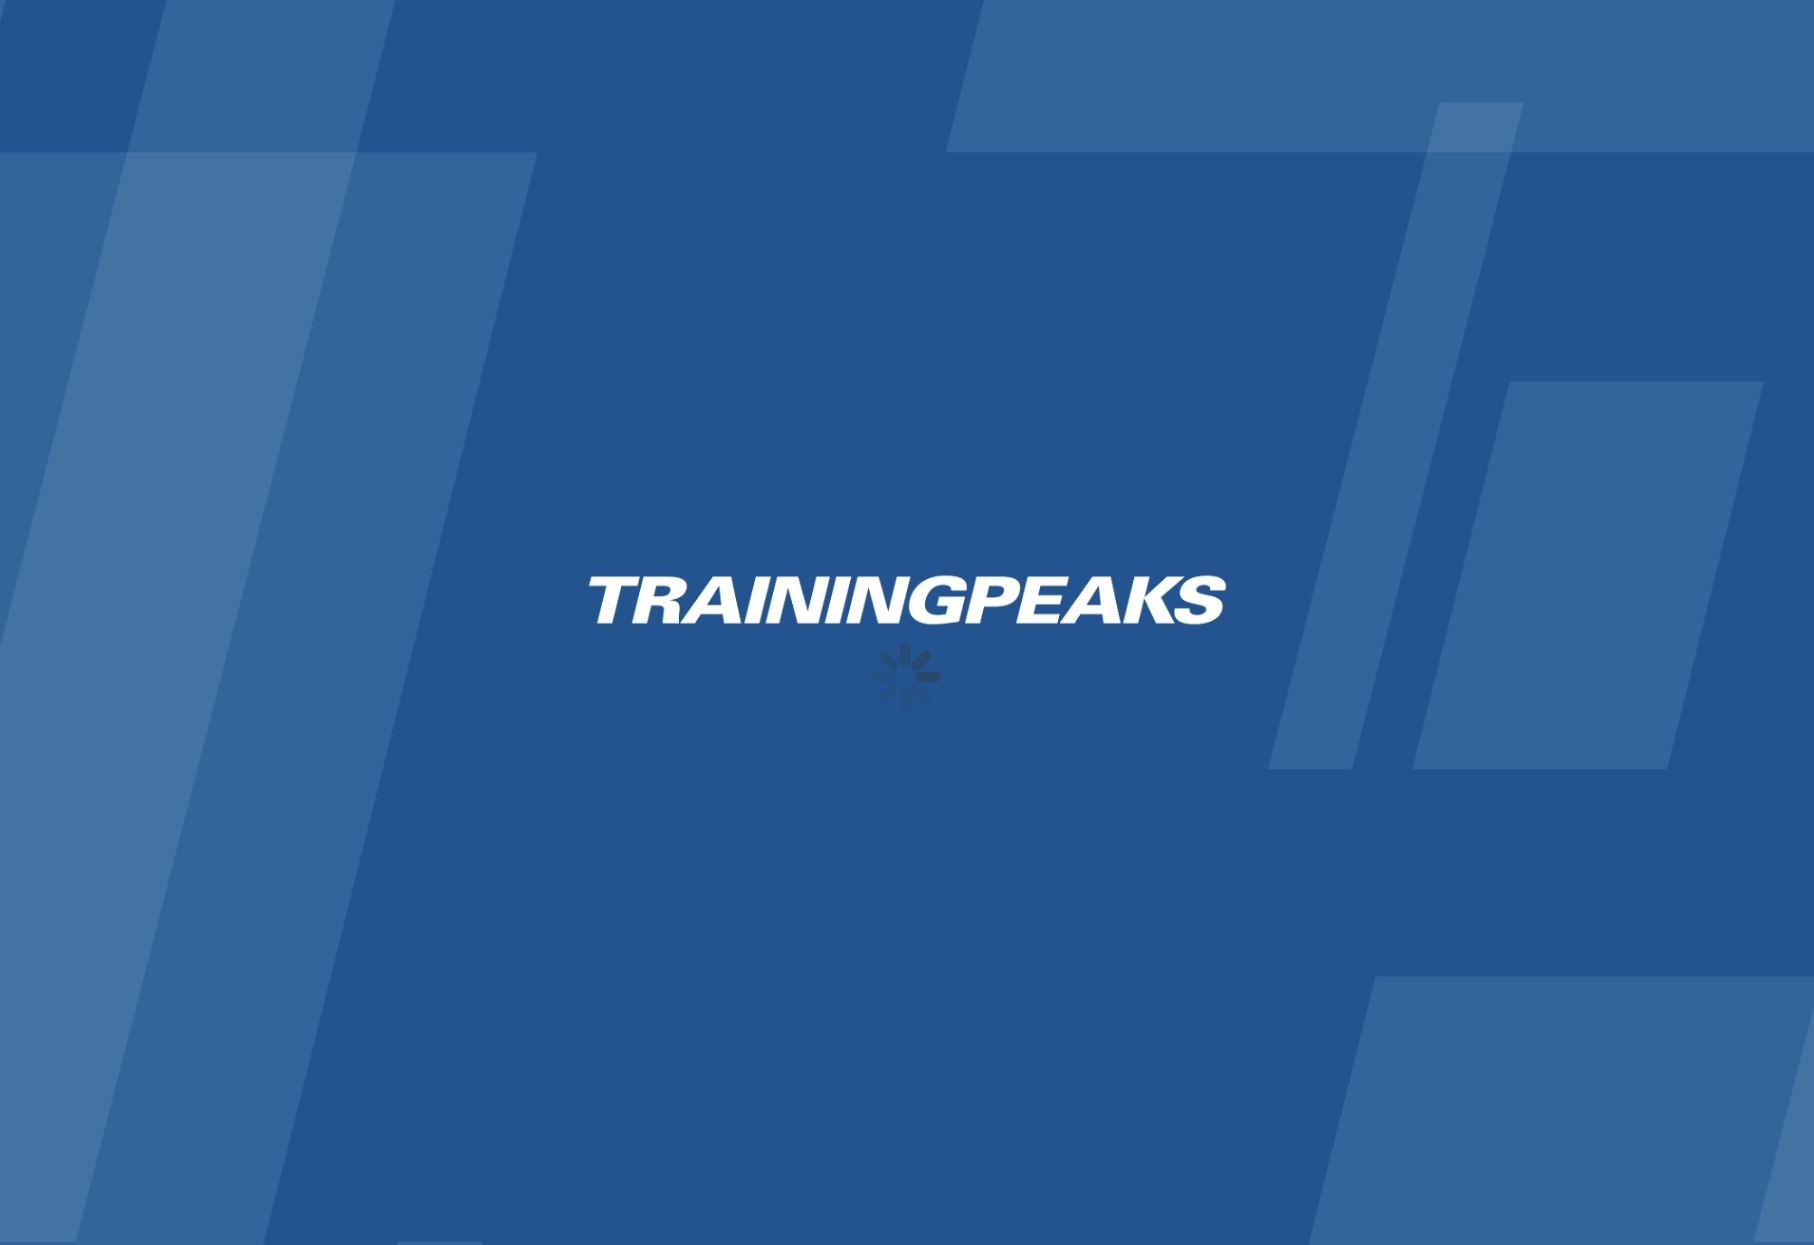 On a blue patterned background it says "trainingpeaks" which is one of the best apps for endurance athletes.